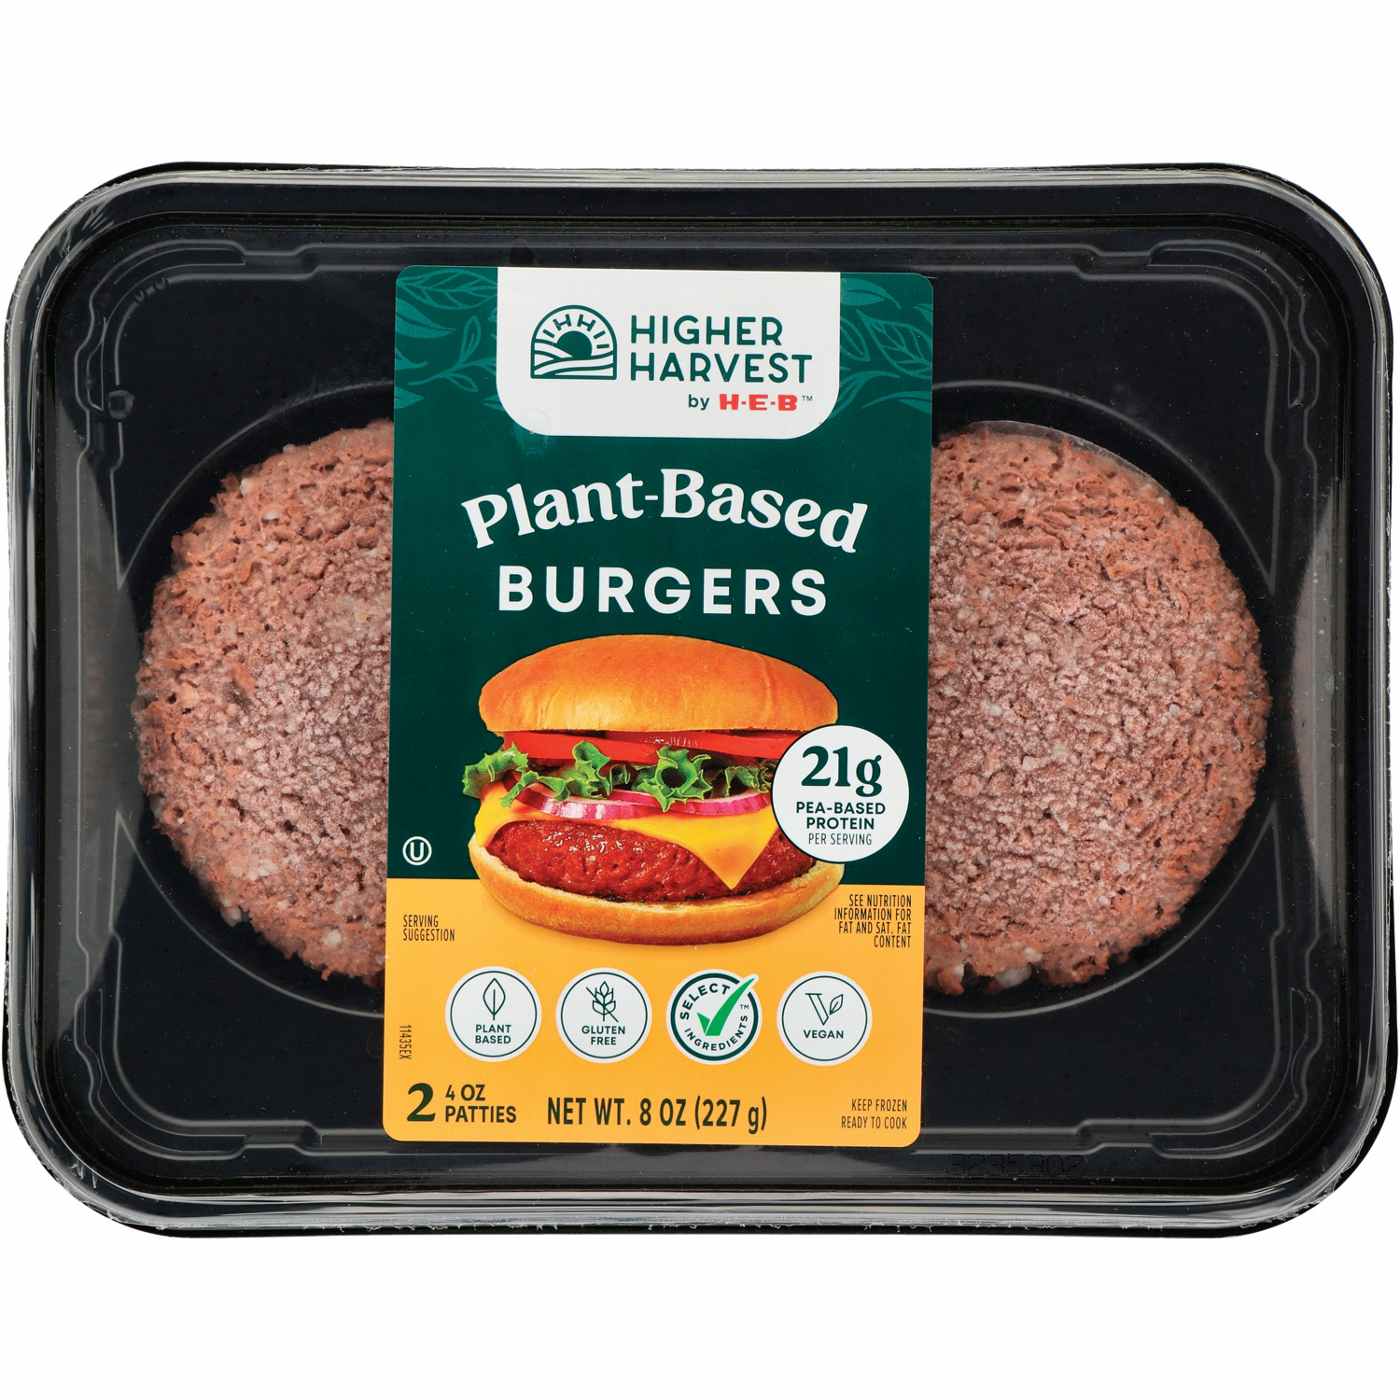 Higher Harvest by H-E-B Frozen Plant-Based Burger Patties; image 1 of 2